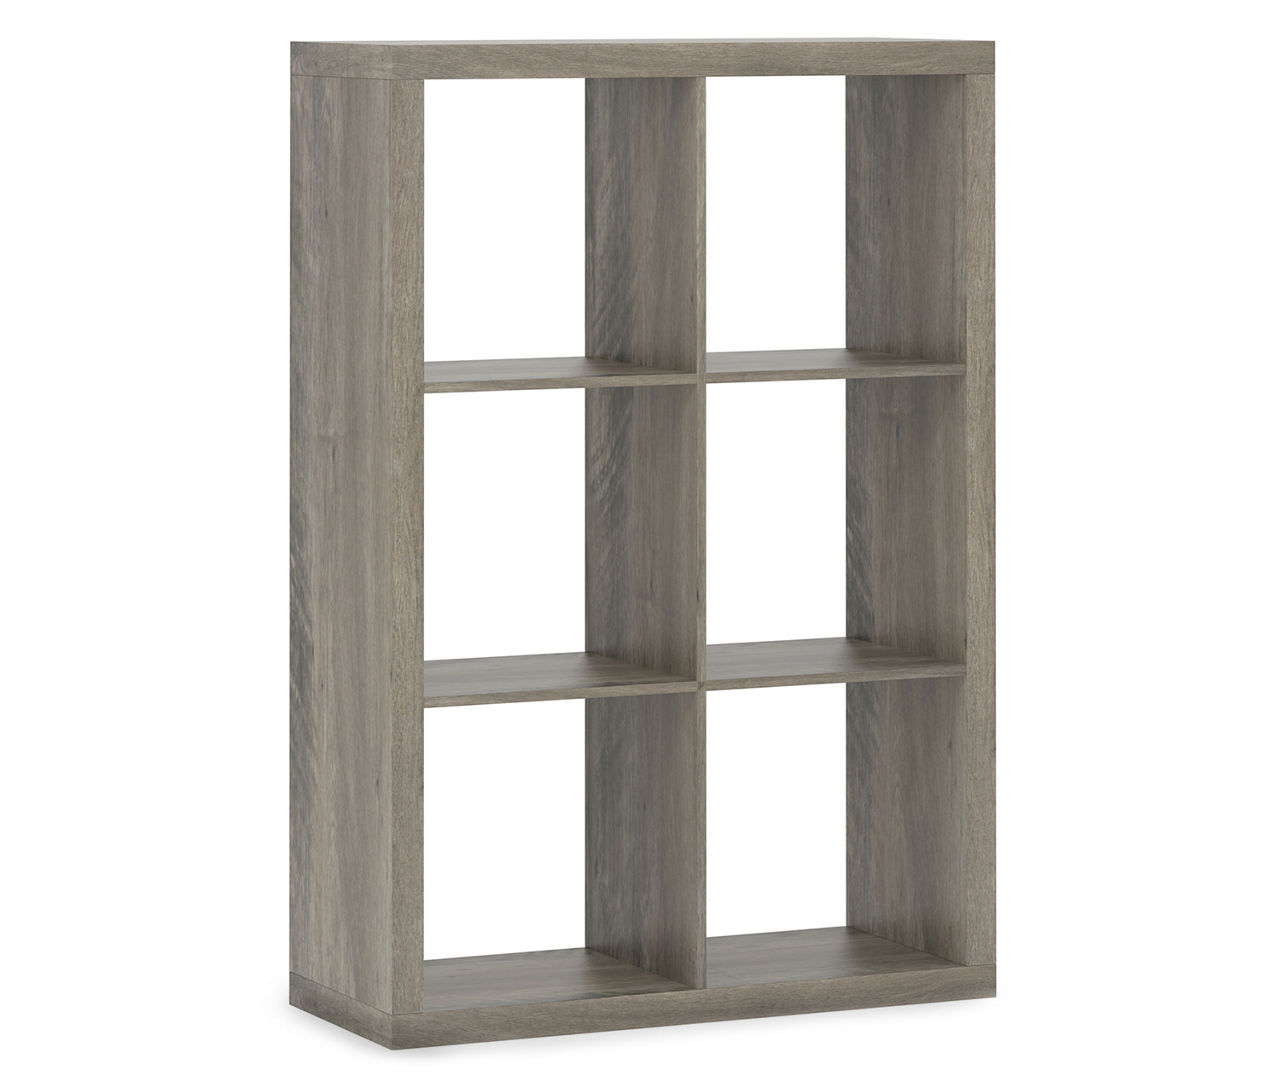 Rustic 6-Cube Storage Cubby